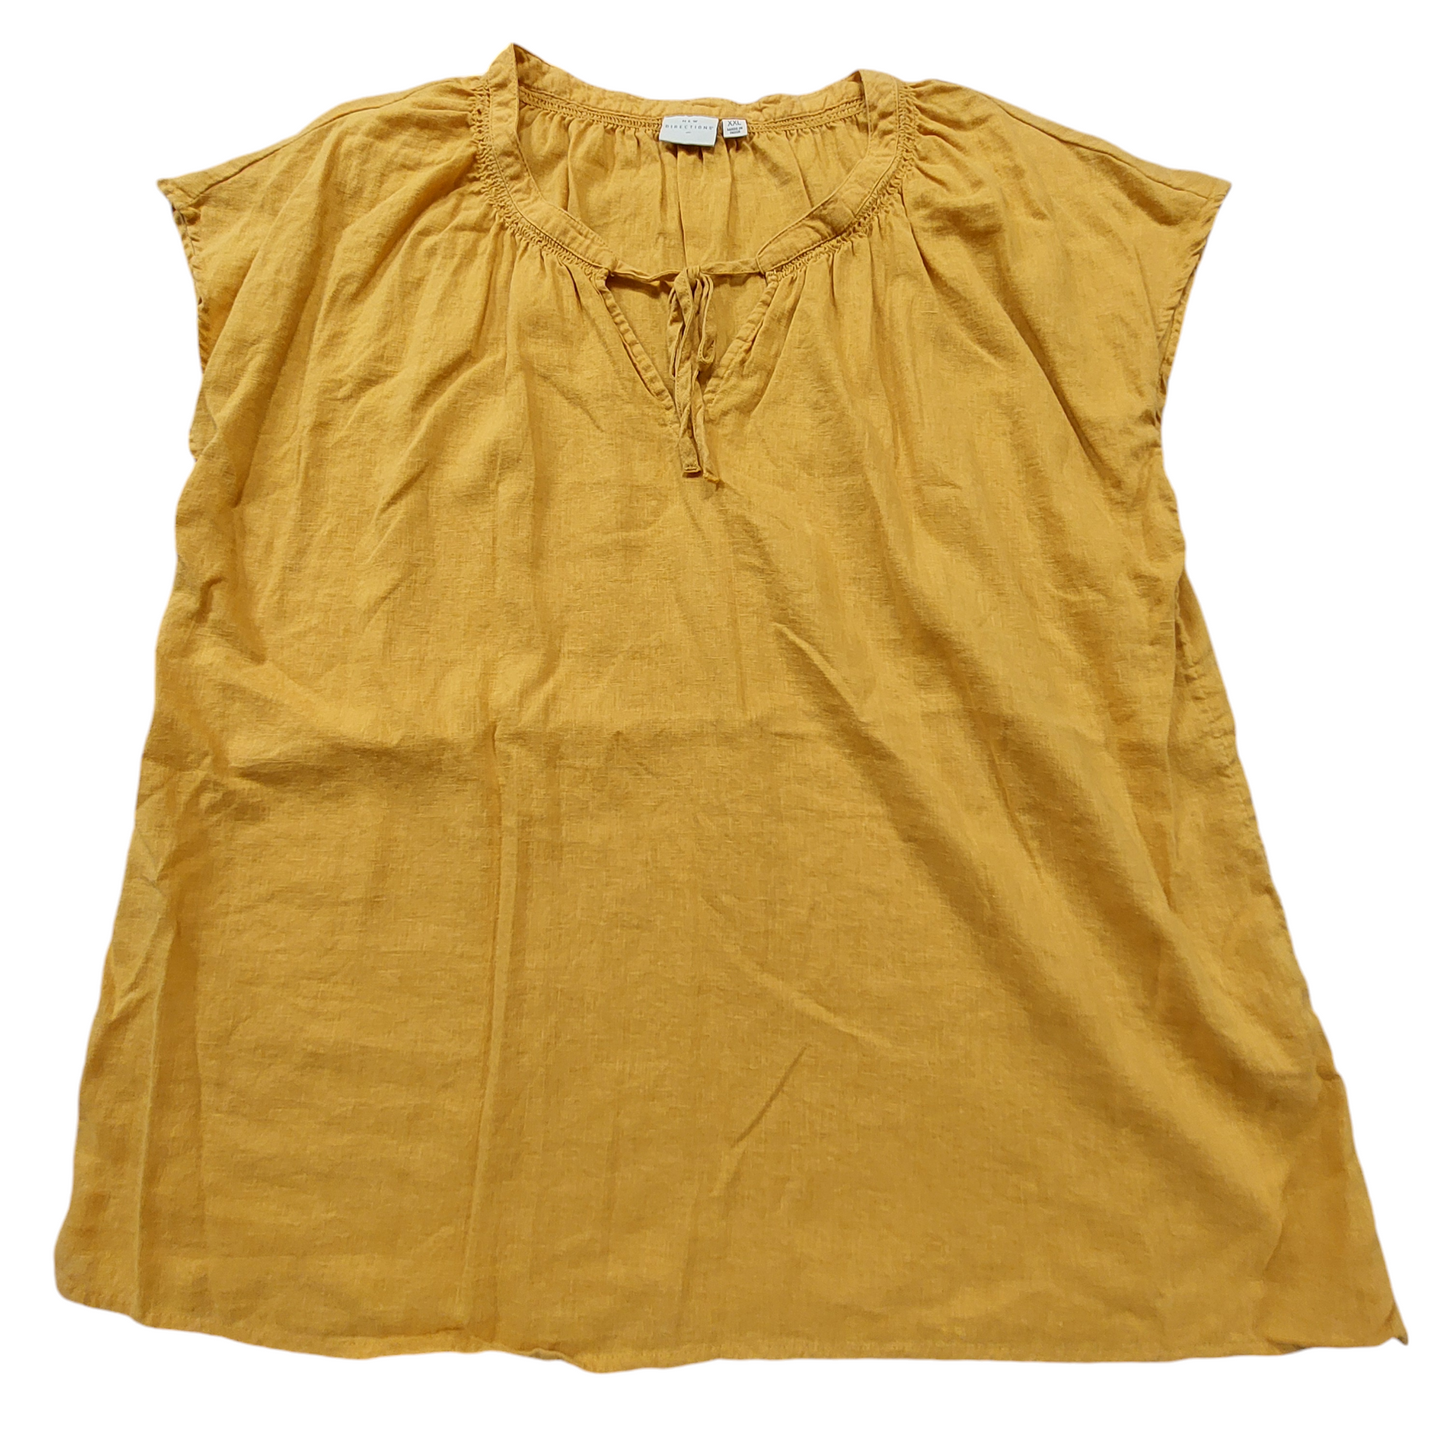 Yellow Top Short Sleeve New Directions, Size Xxl